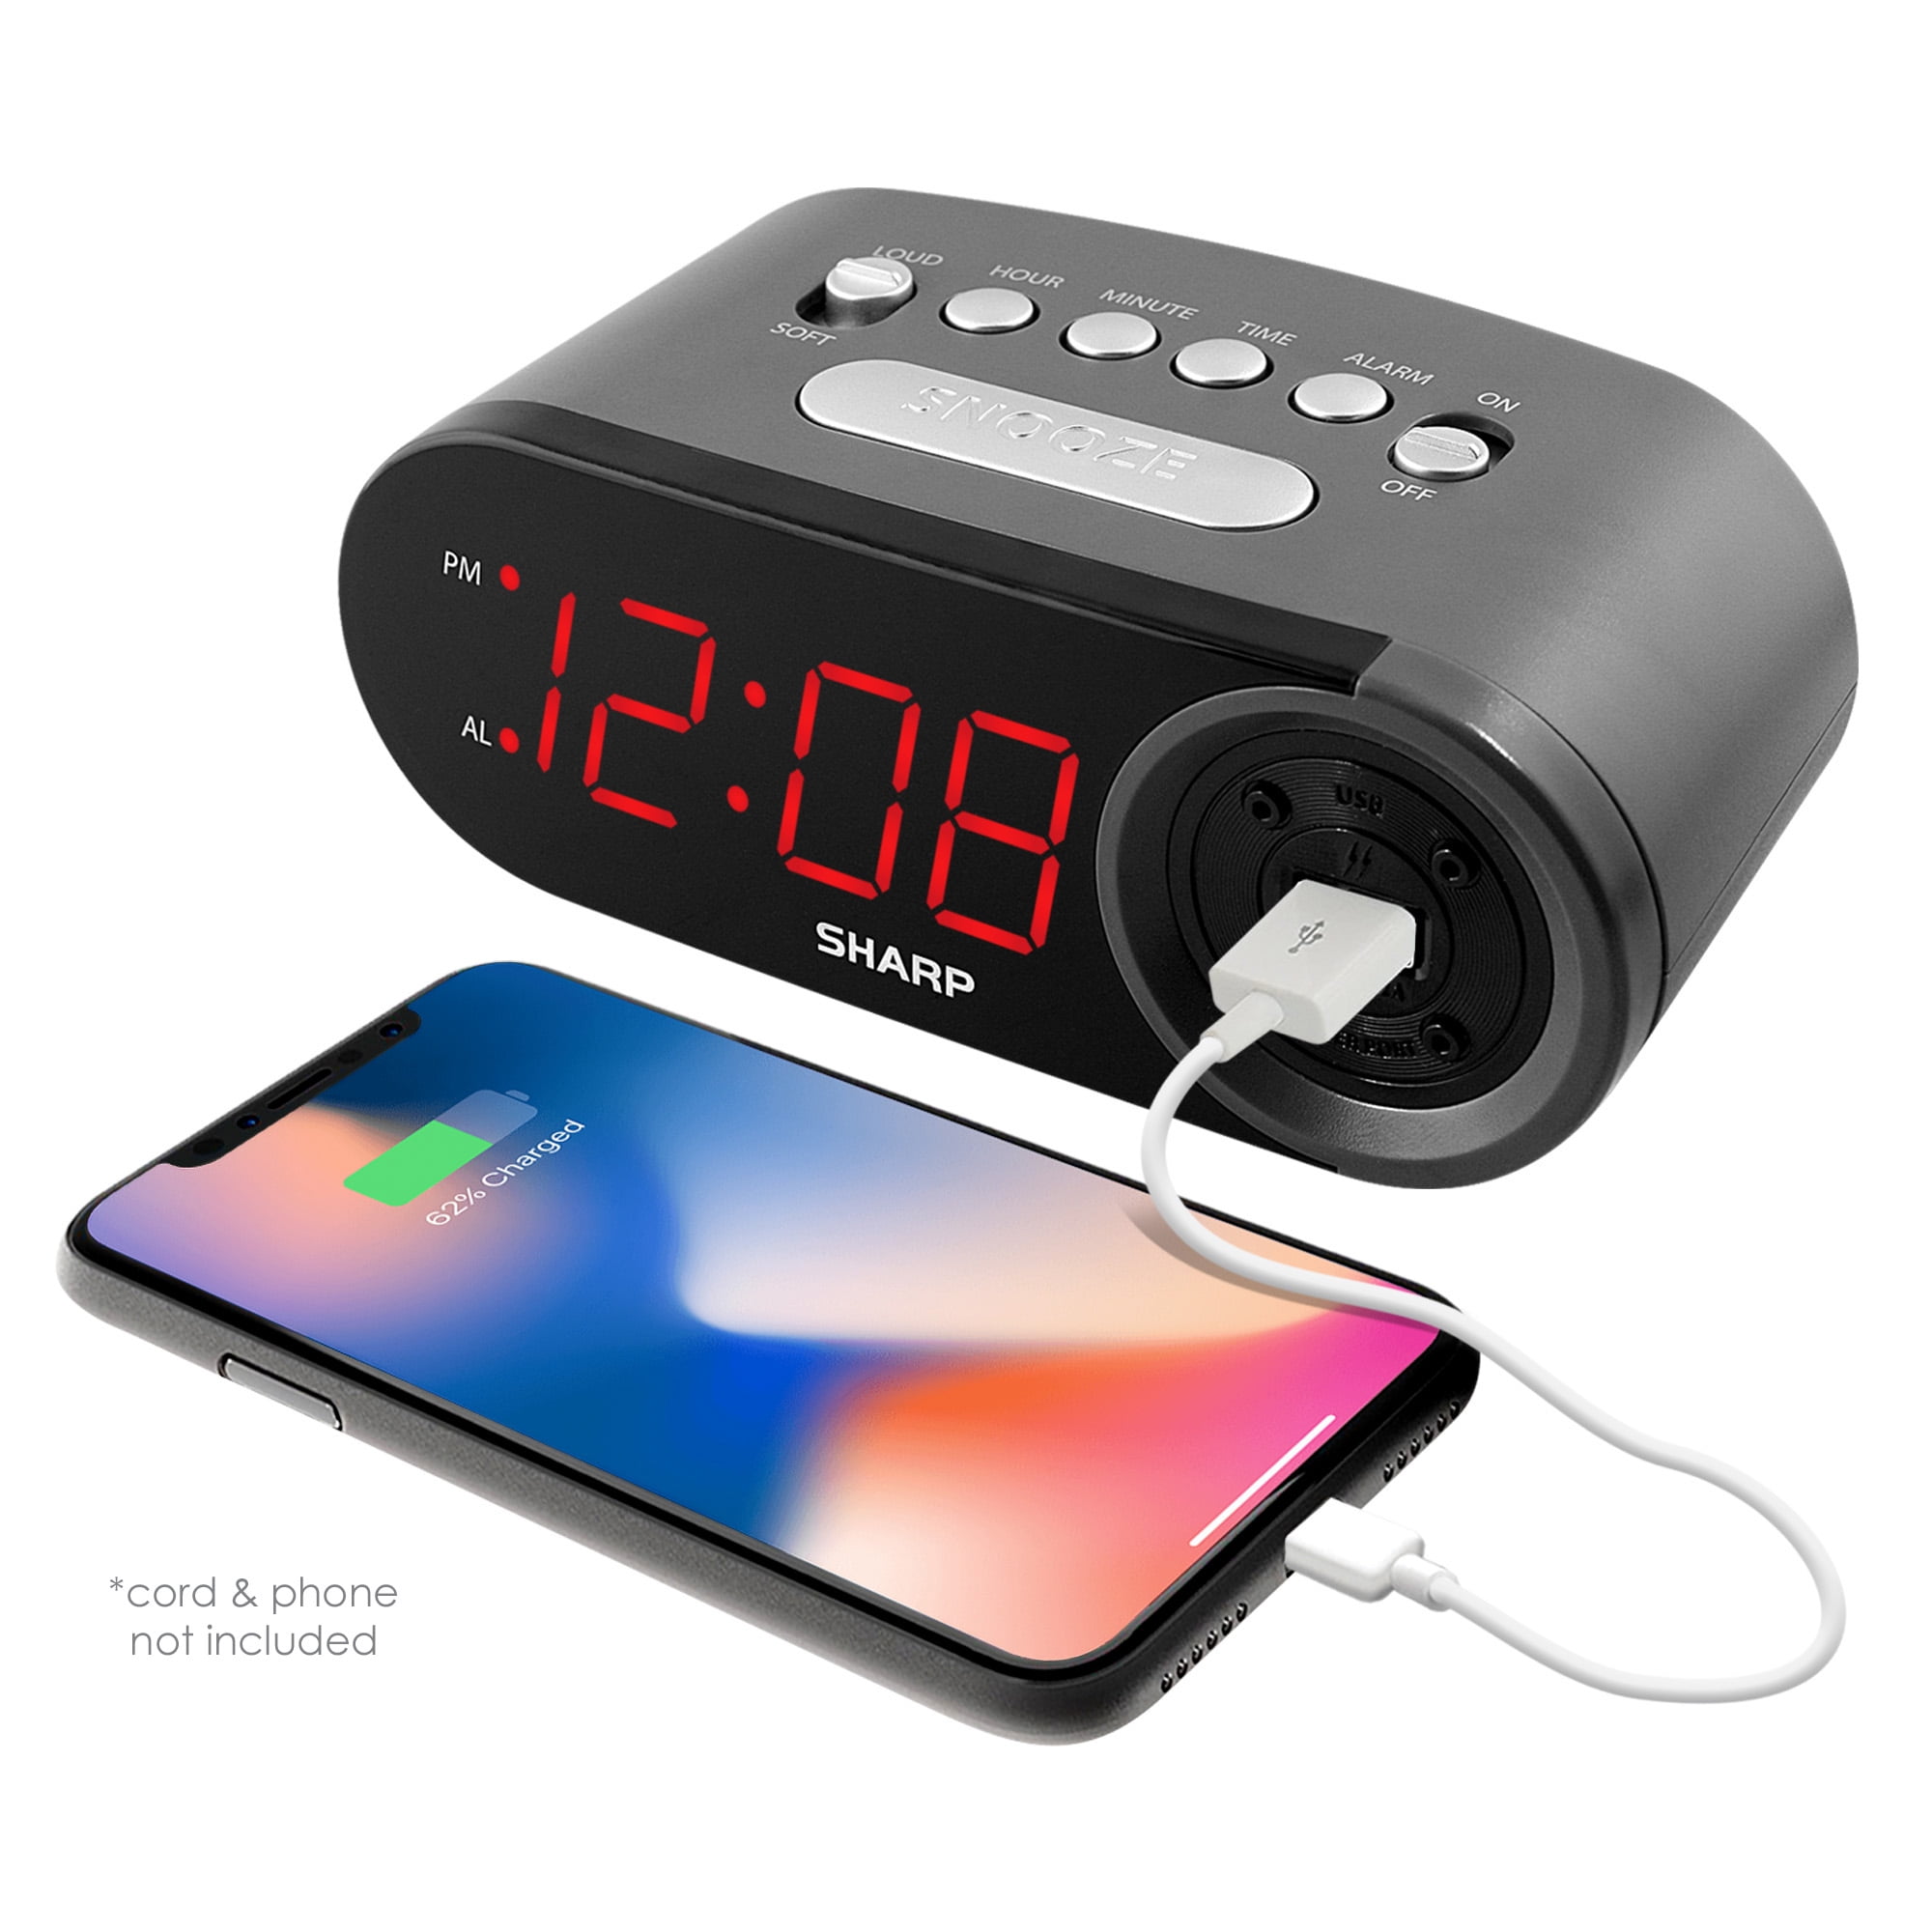 Sharp Digital Alarm Clock 2x 2AMP  USB Charge Ports for Cell phone/Tablet New 